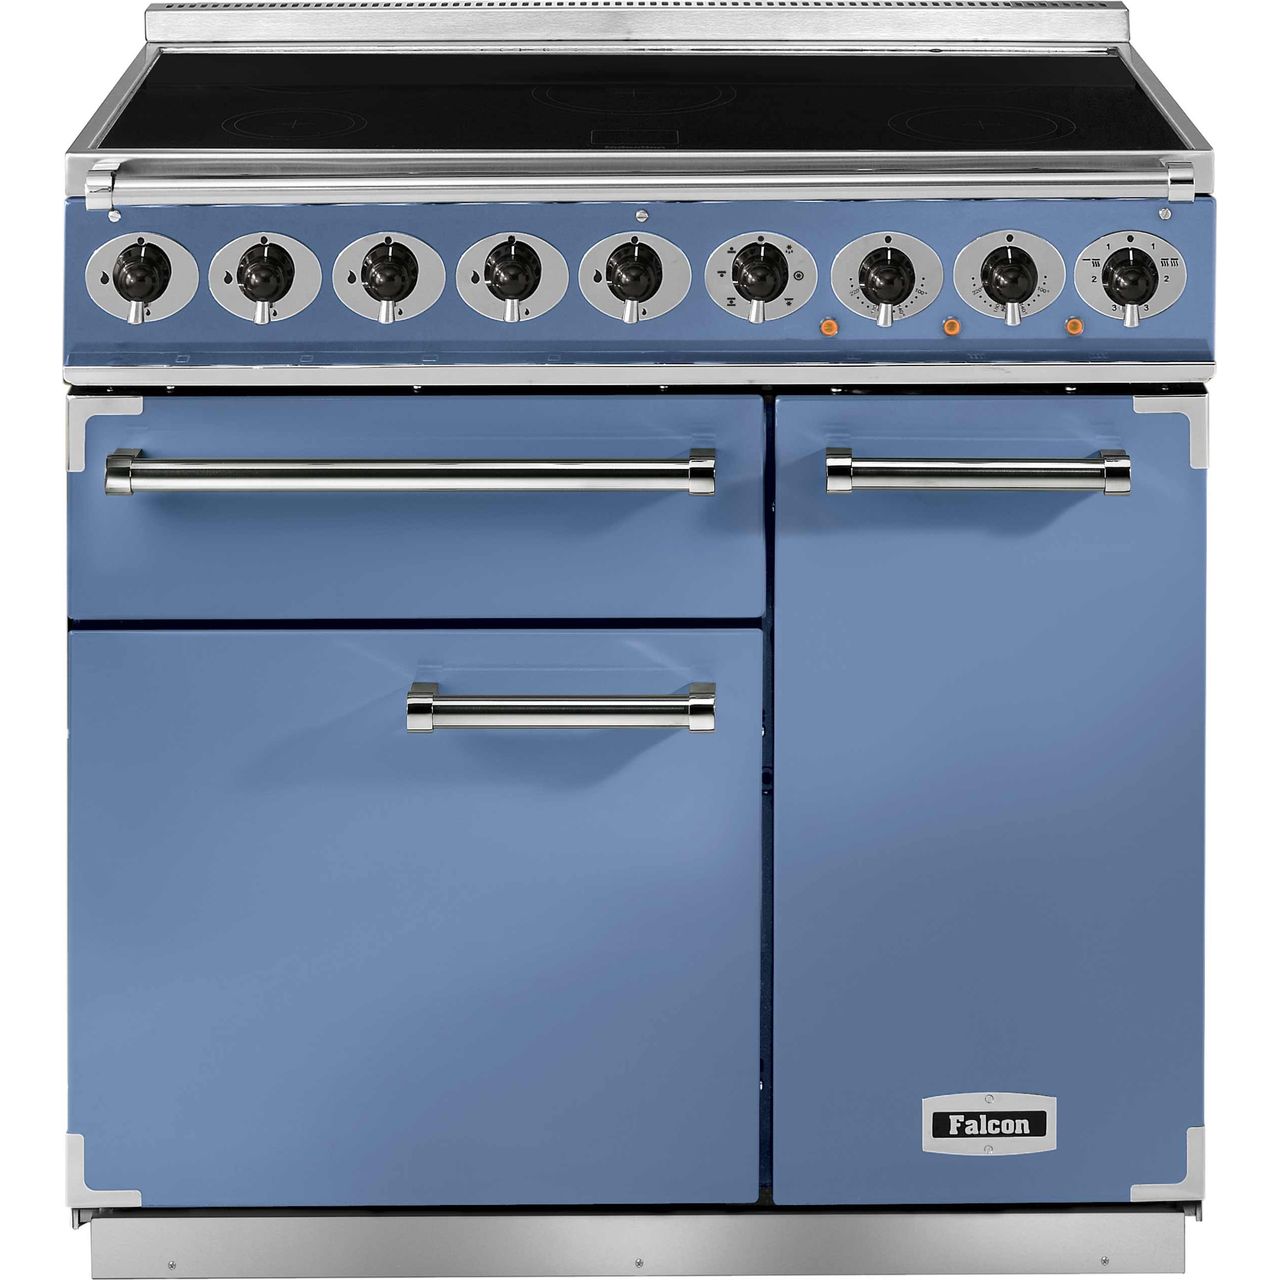 Falcon 900 DELUXE F900DXEICA/N 90cm Electric Range Cooker Review